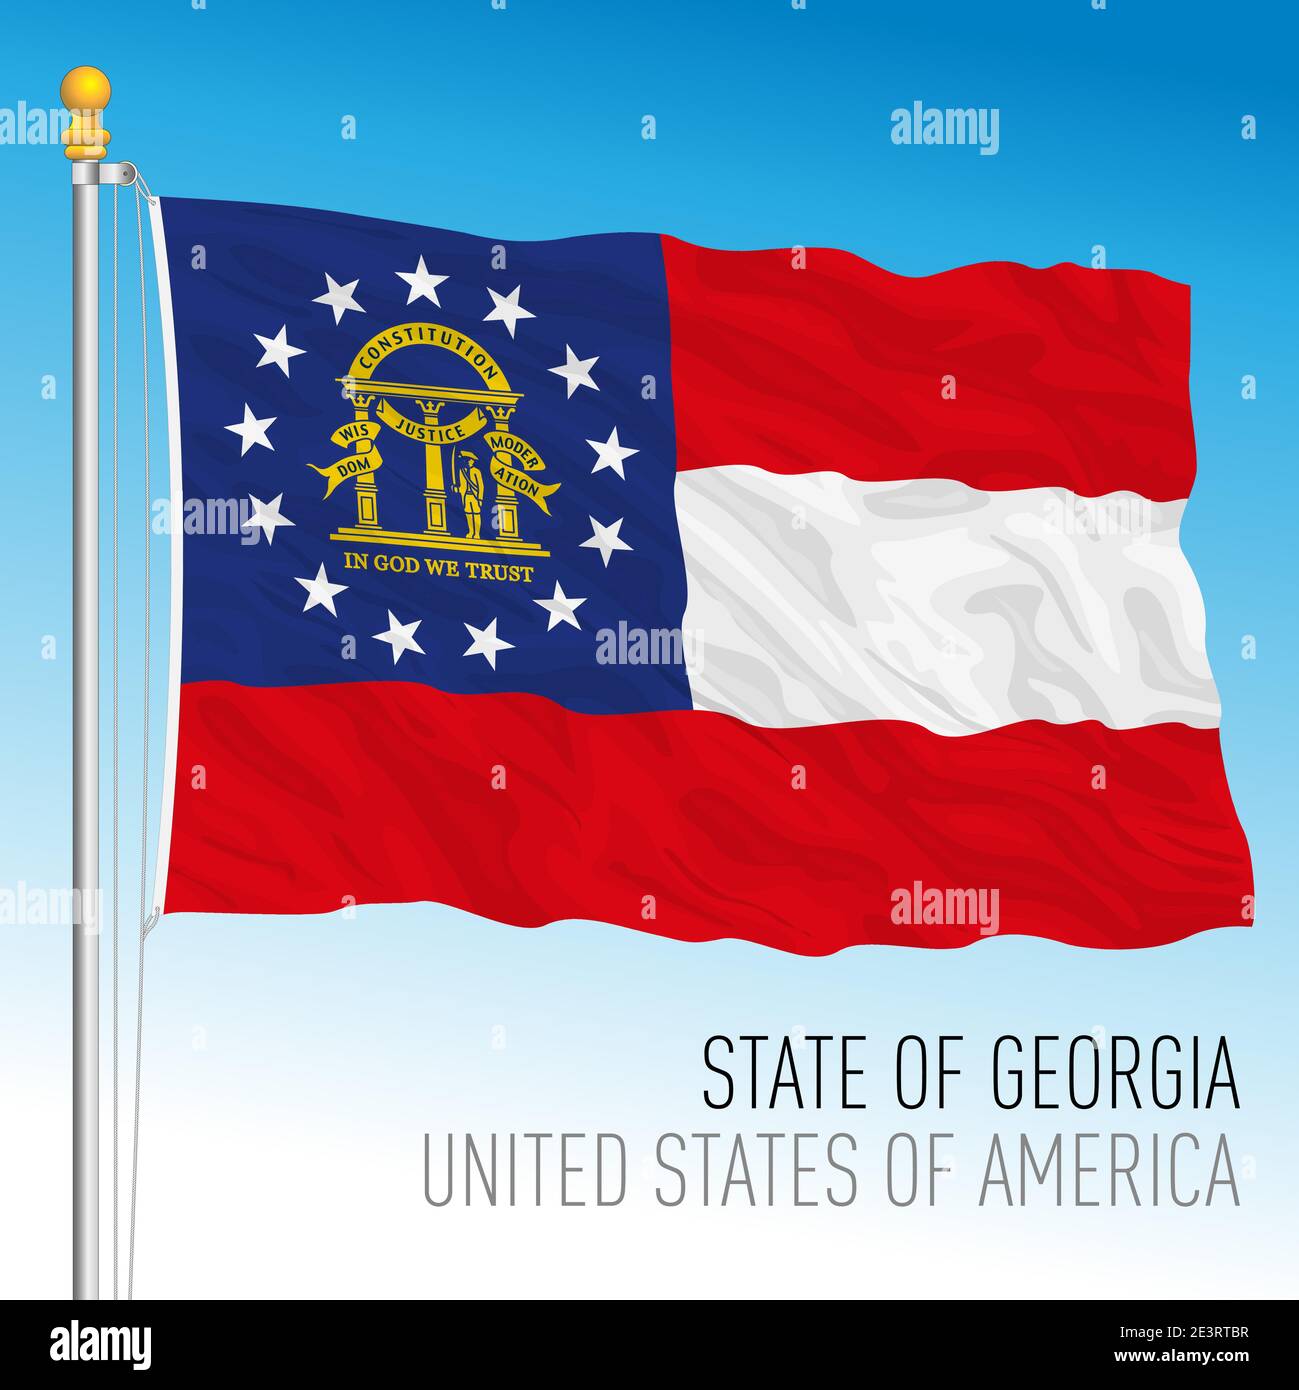 Georgia federal state flag, United States, vector illustration Stock Vector